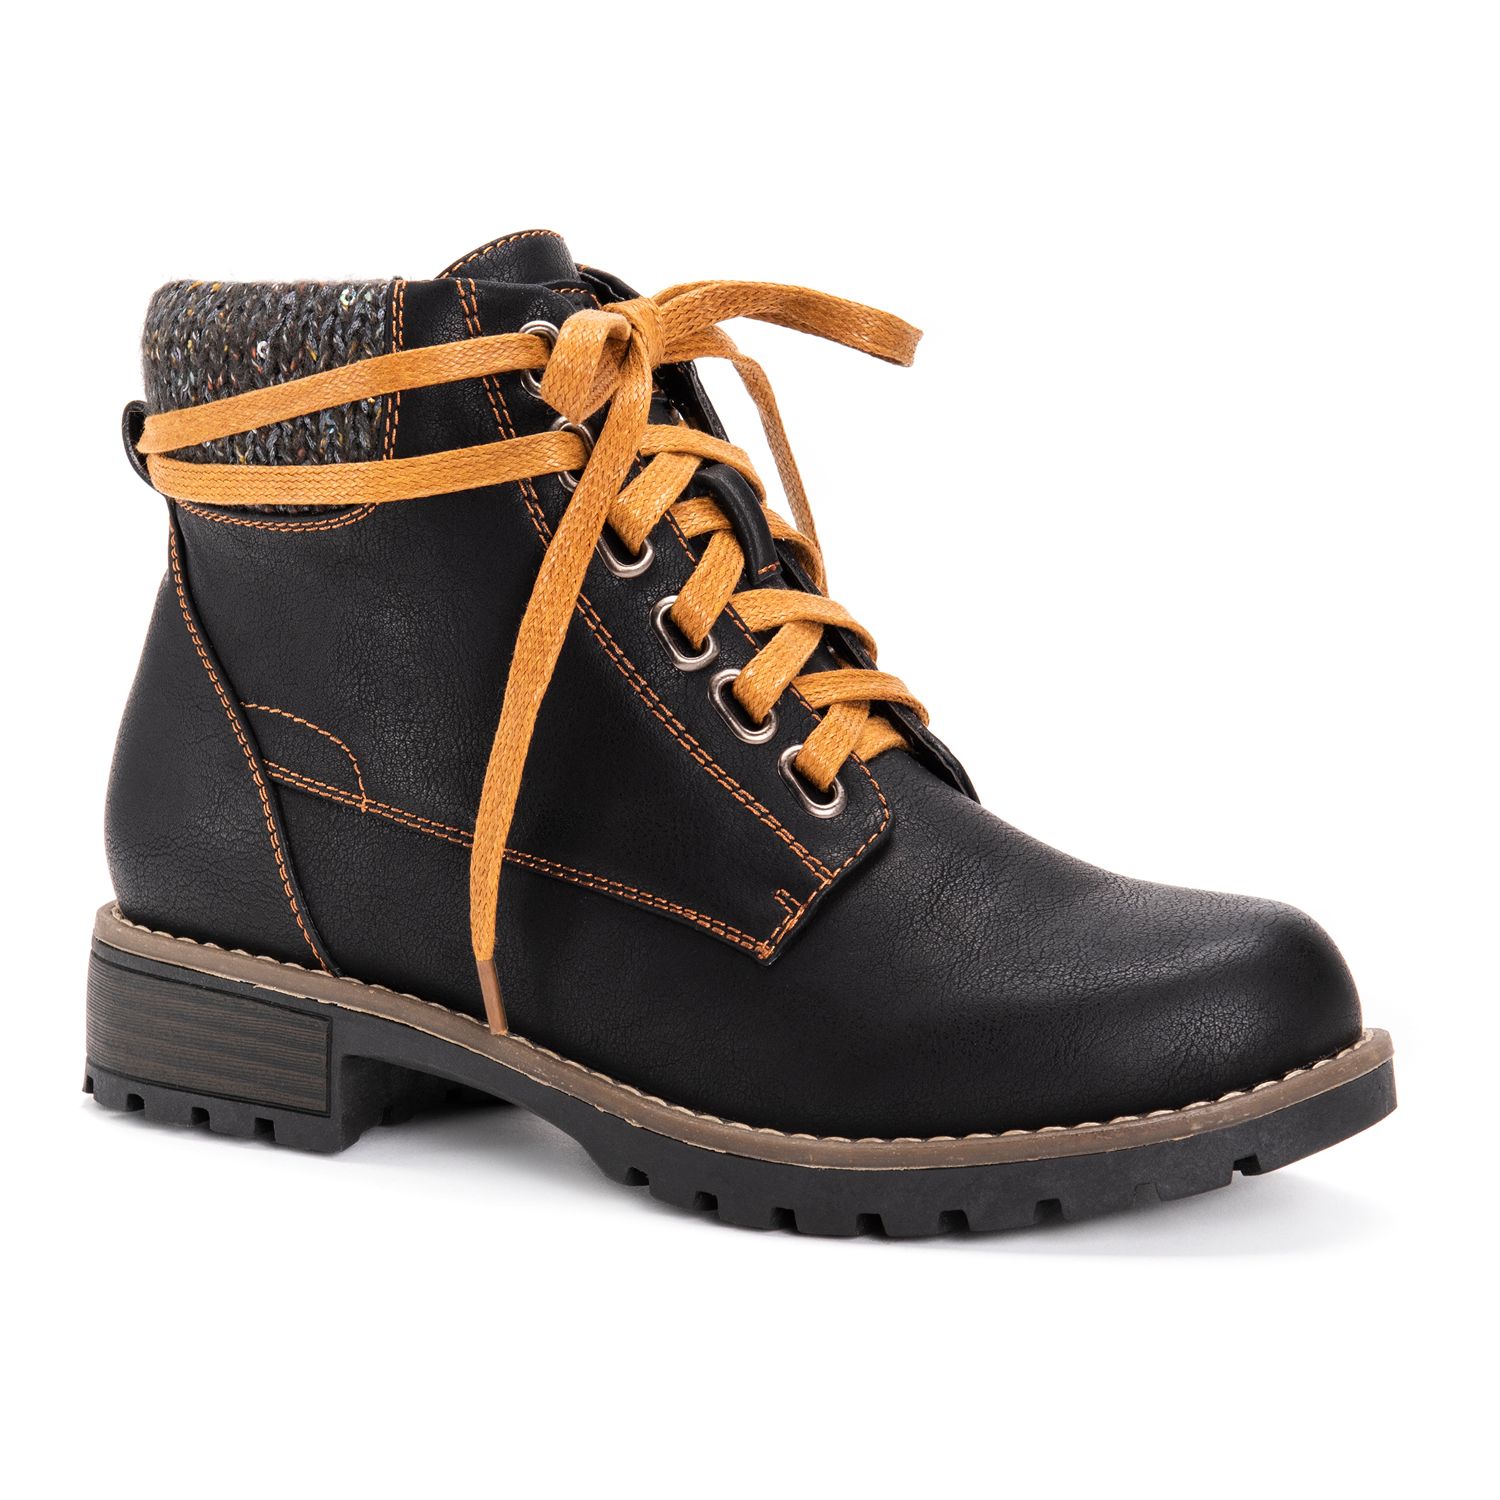 kohl's timberland work boots